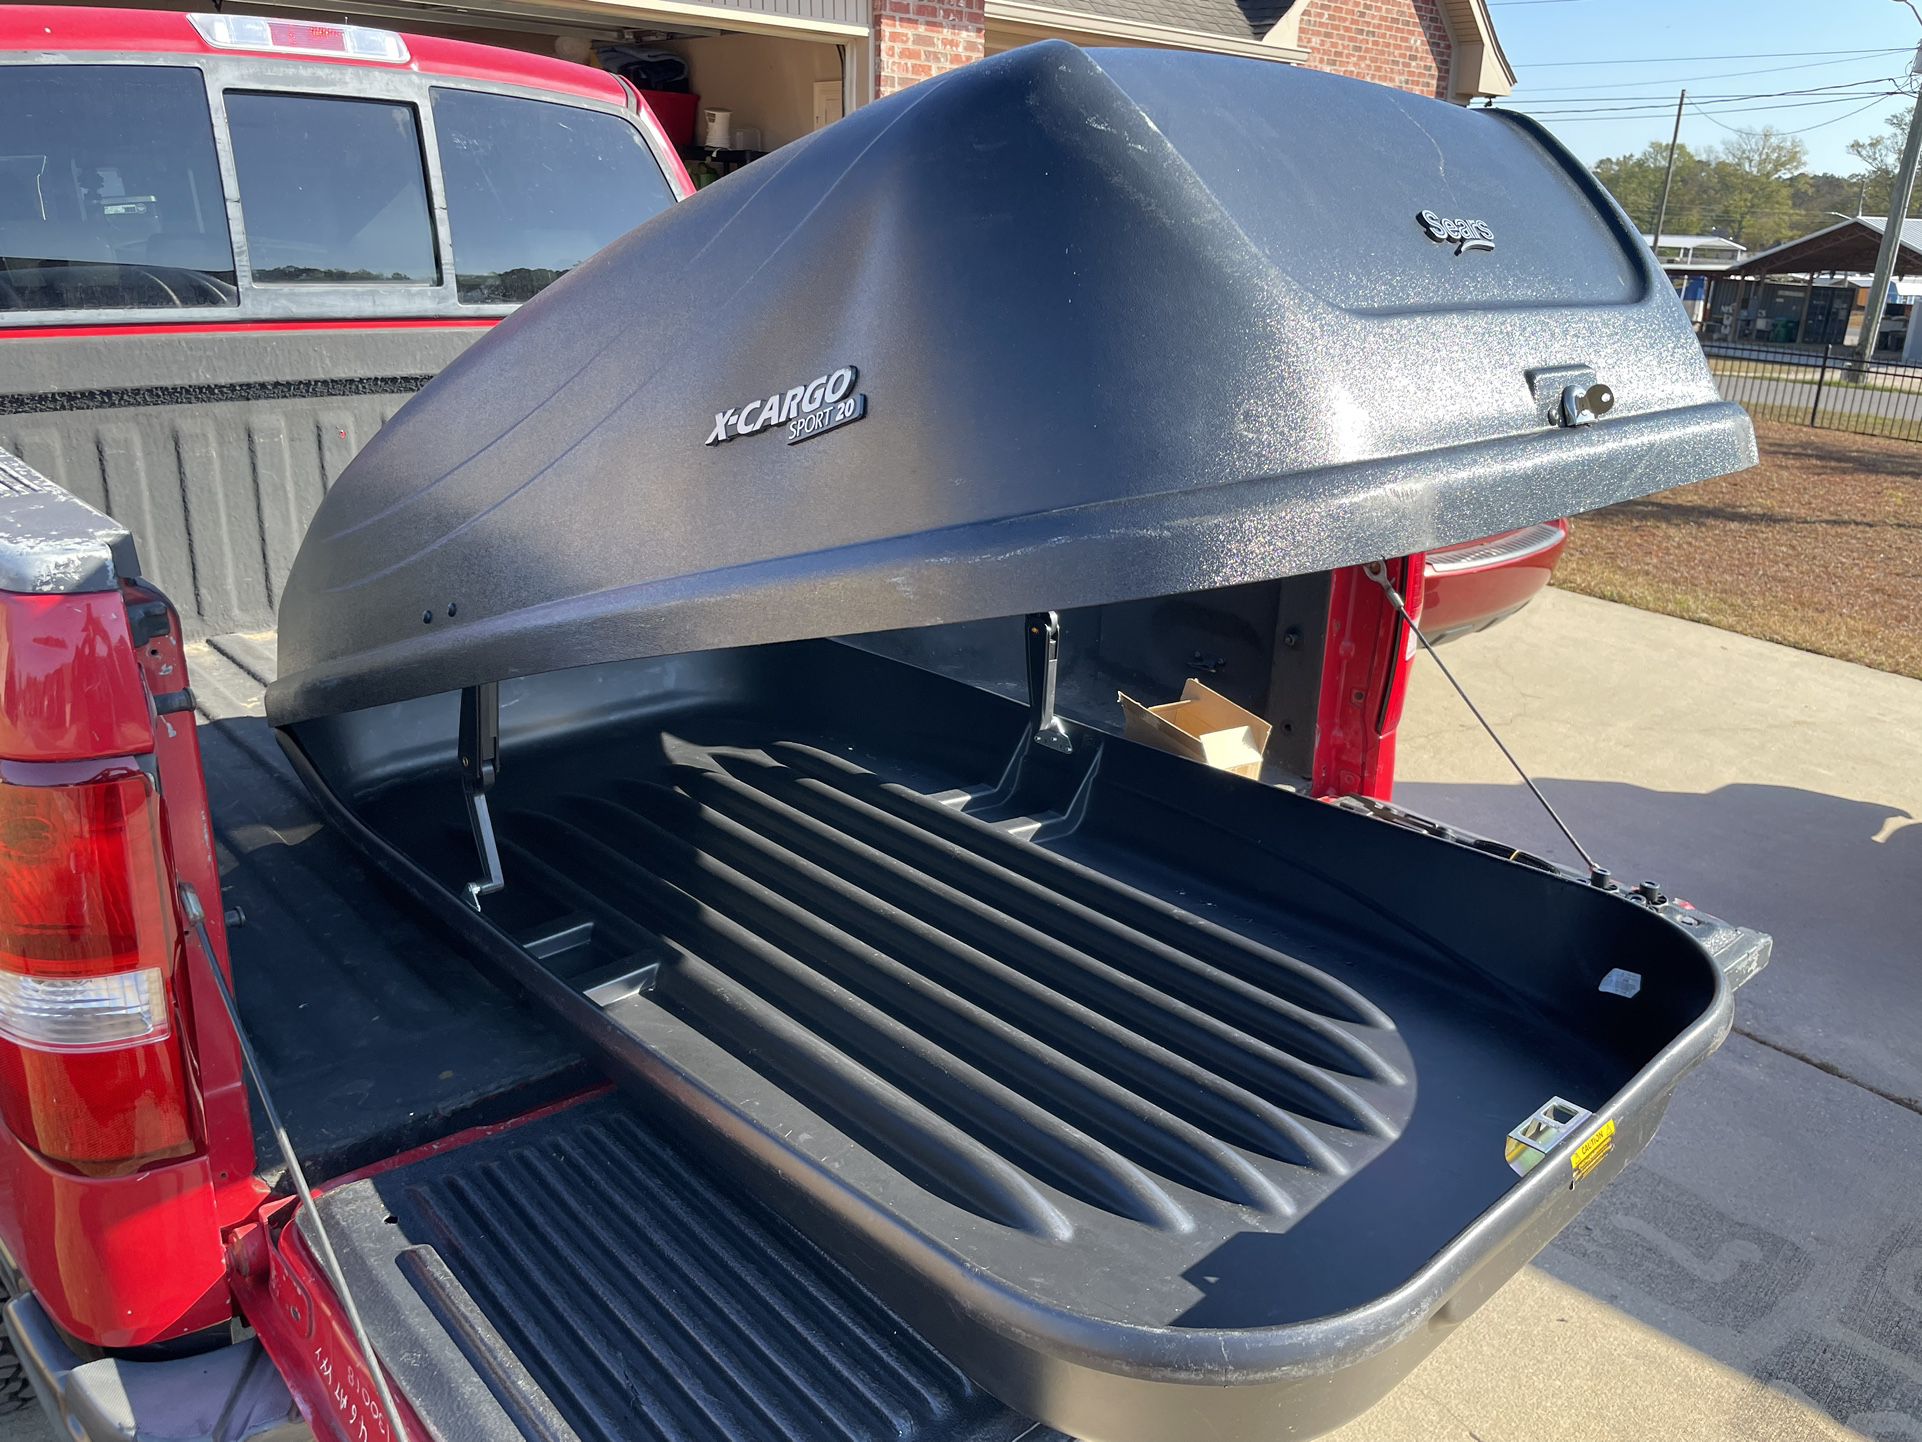 ROOF CARGO CARRIER (SEARS)